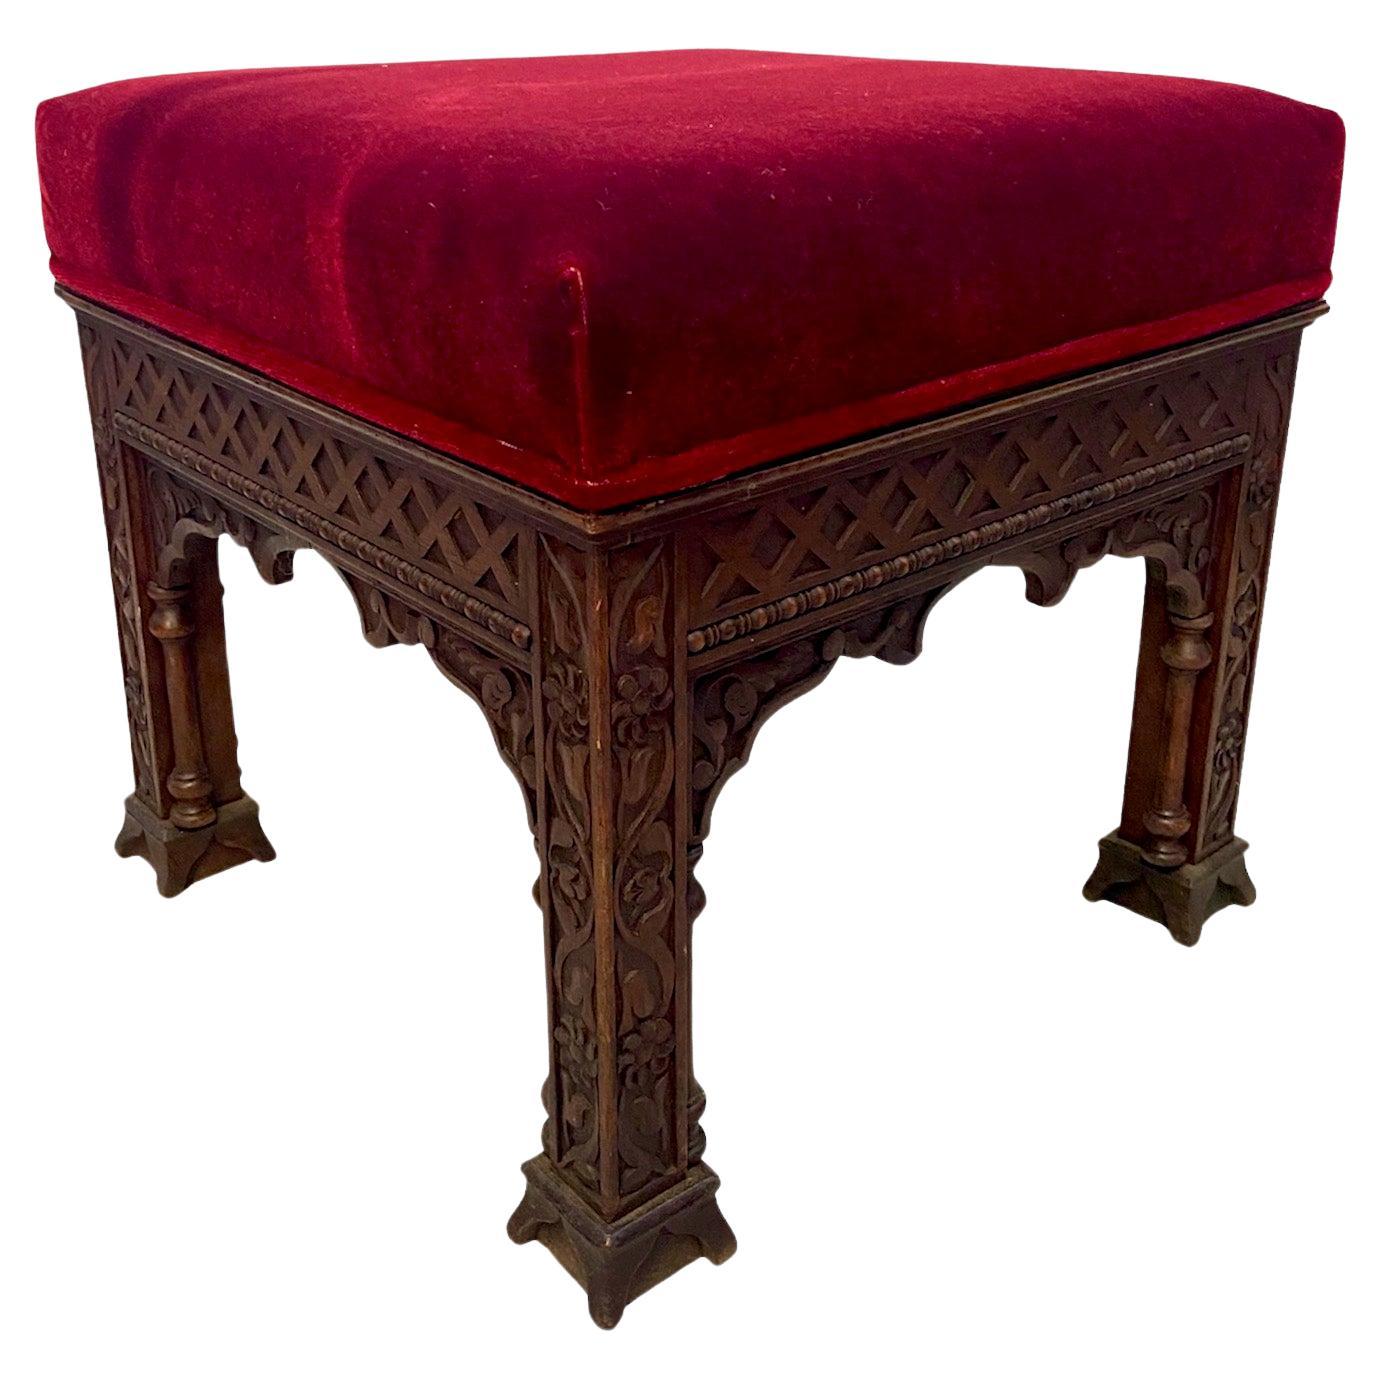 British intricate victorian, arts and crafts moorish style stool, possibly Liberty For Sale